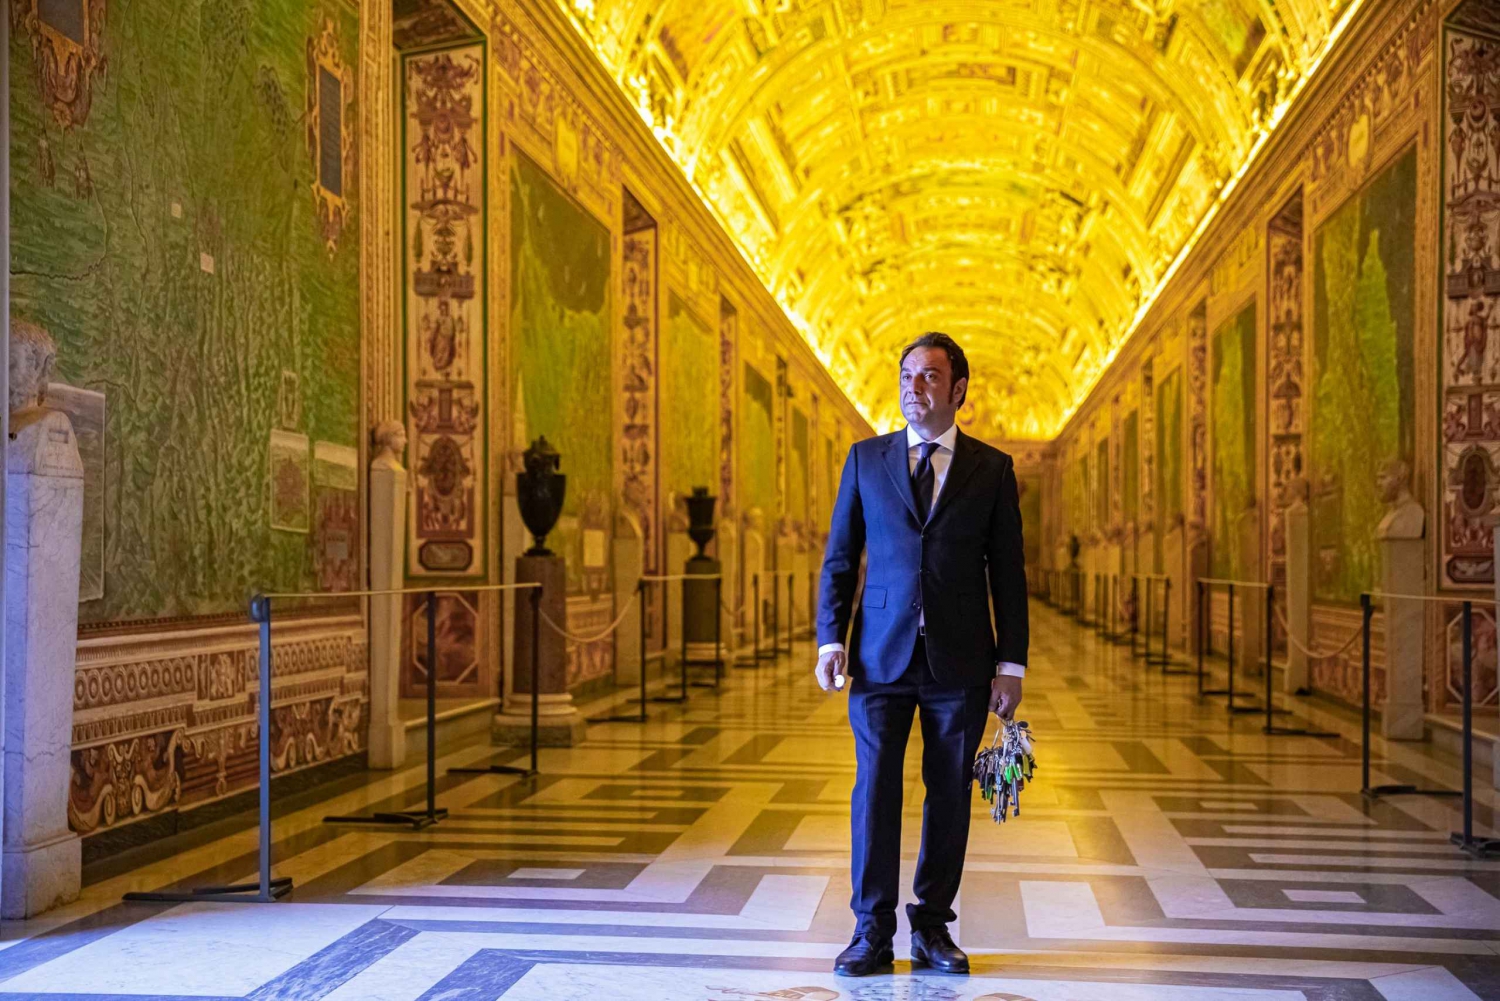 Rome: Turn the Lights on at the Vatican Museums